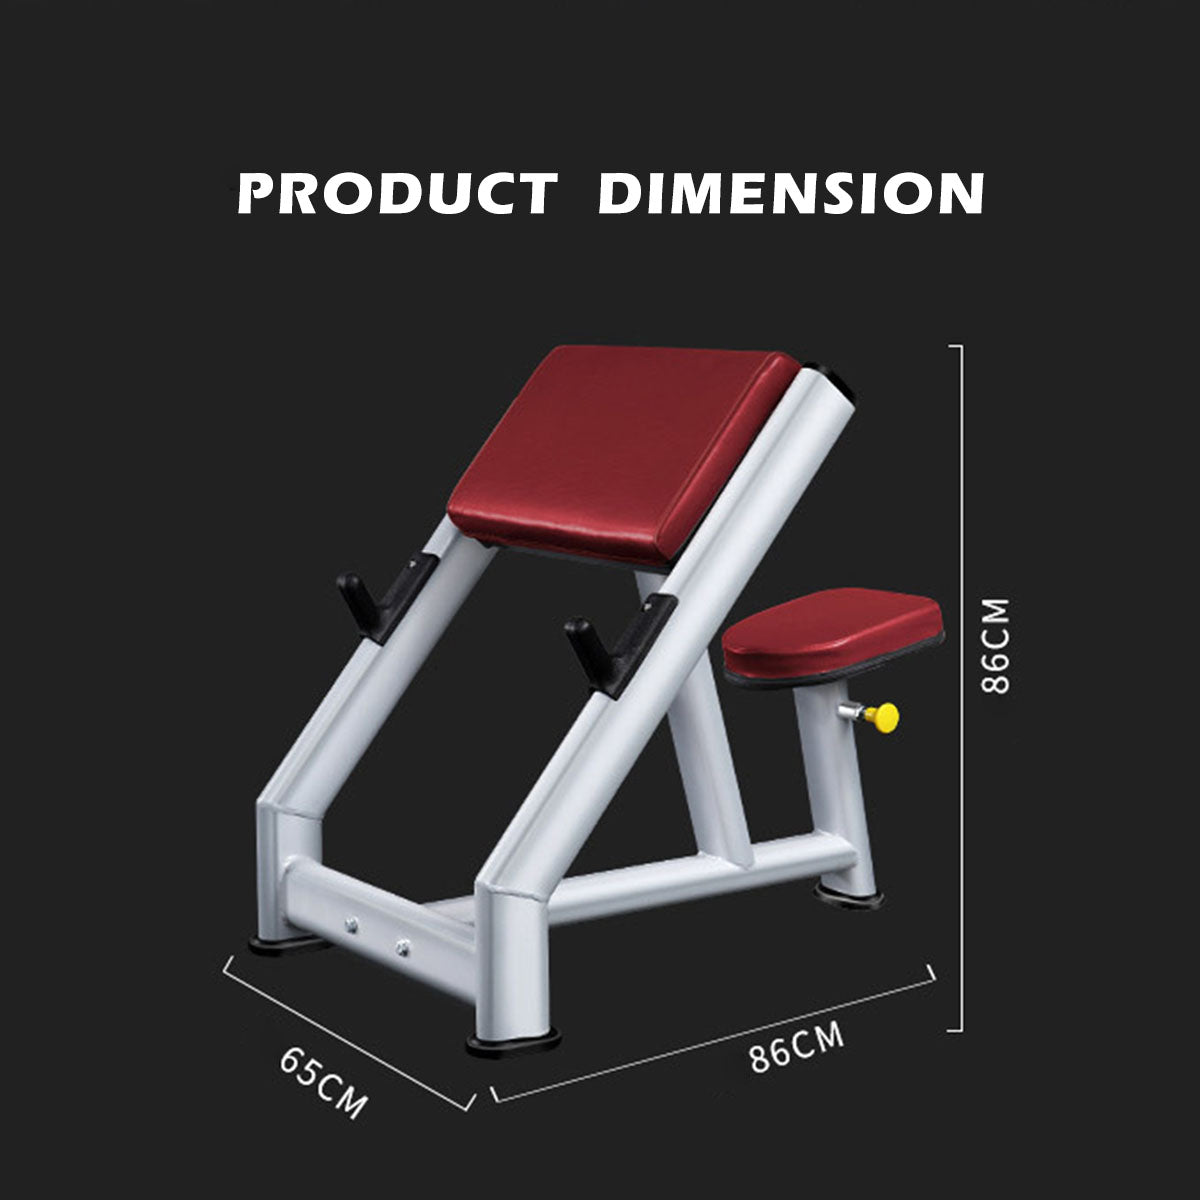 Commercial Preacher Curl Biceps Training Bench dimension